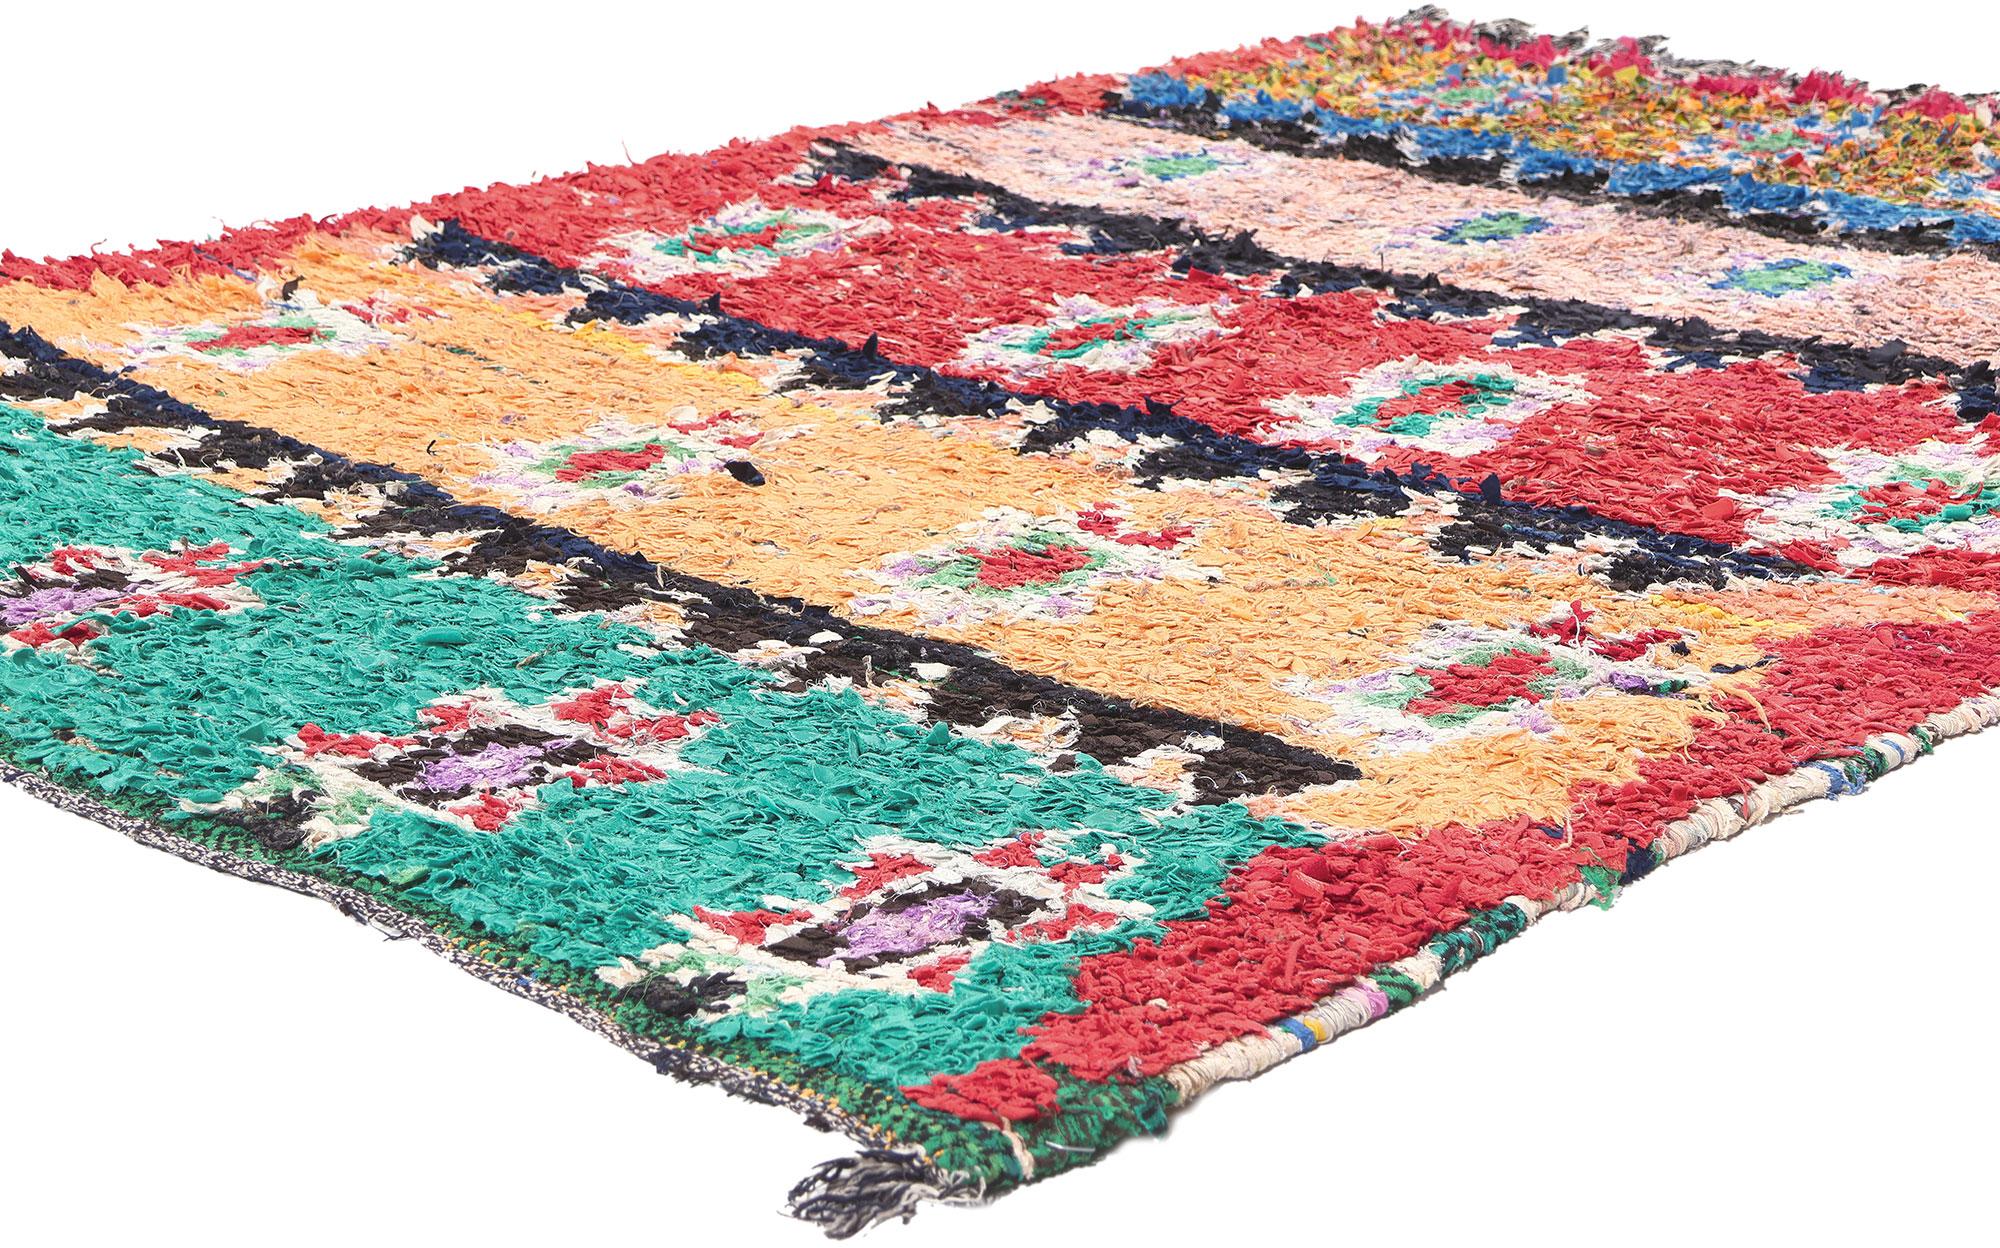 20457 Vintage Boucherouite Boujad Moroccan Rag Rug, 04'07 x 06'02. Immerse yourself in the vibrant vitality of Boujad Boucherouite rugs, emerging from the bustling lanes of Boujad in the Khouribga region. Crafted with precision by Berber tribes,